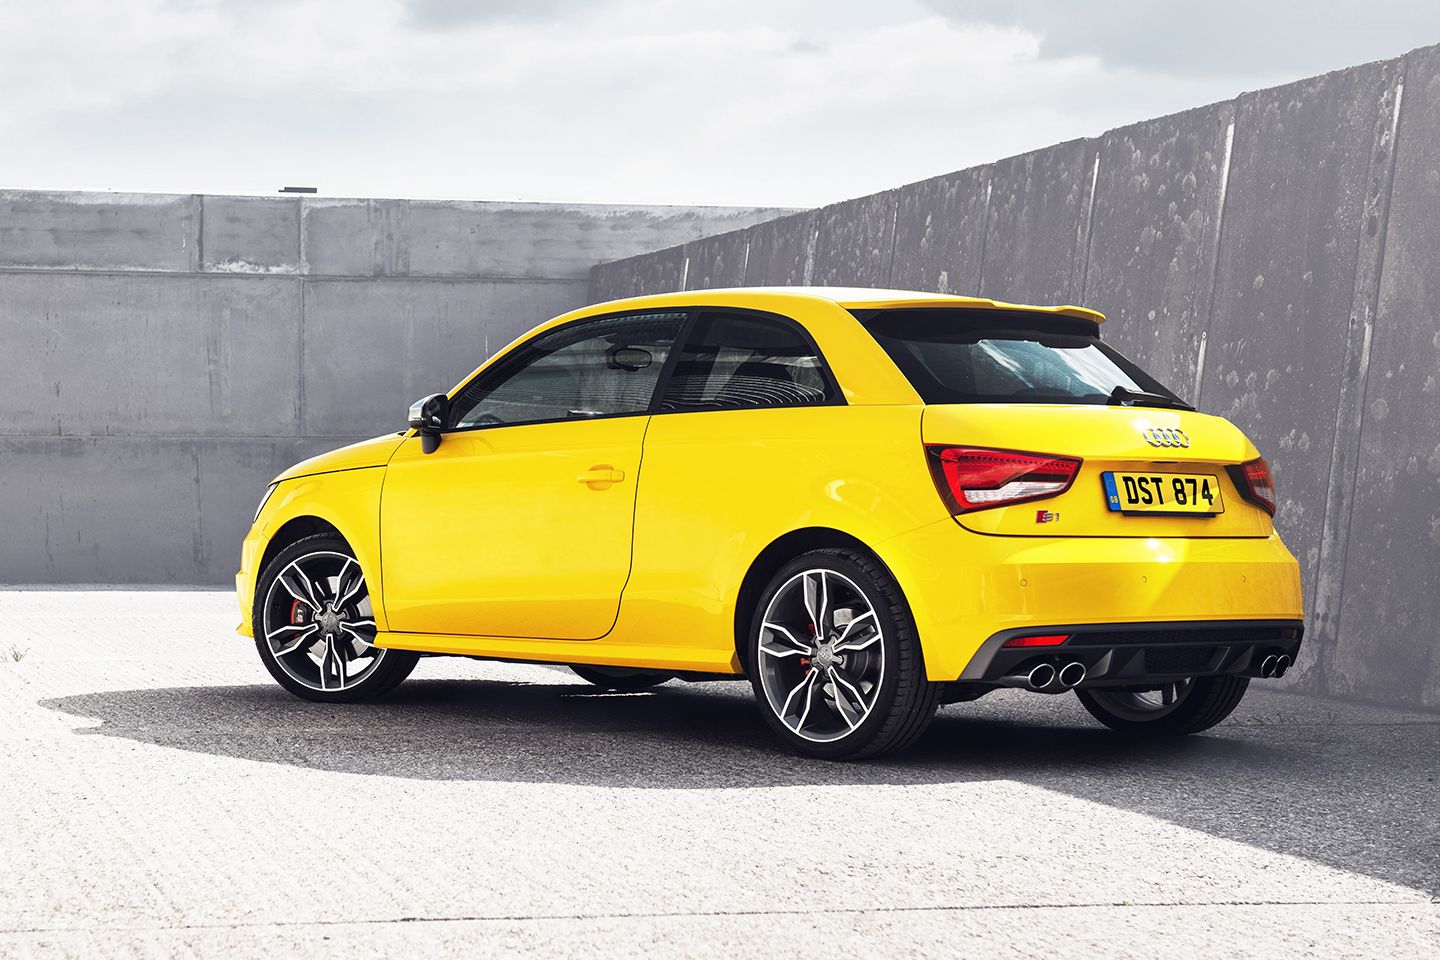 Audi S1: A Fast Hatchback You're Not Going to See in the U.S.